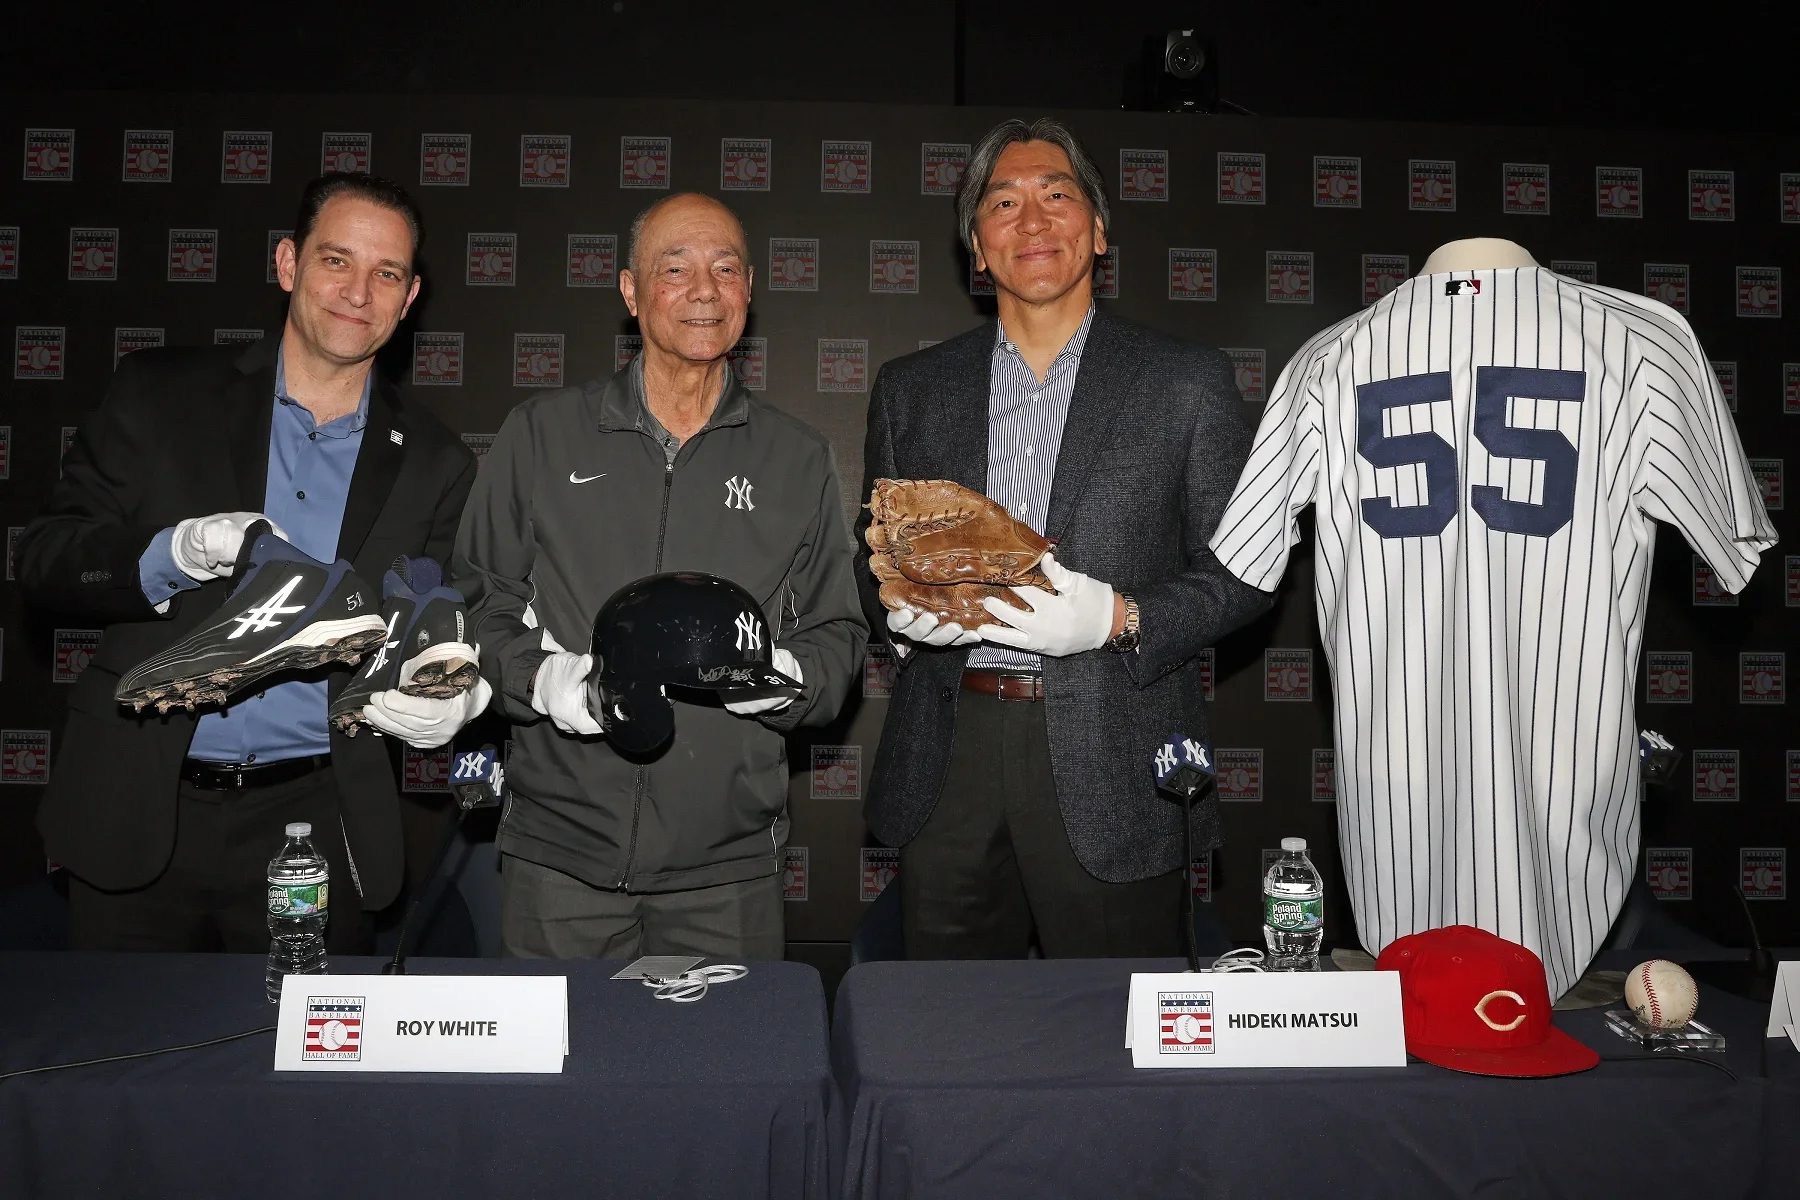 From L to R: Hall of Fame President Josh Rawitch, Roy White and Hideki Matsui.